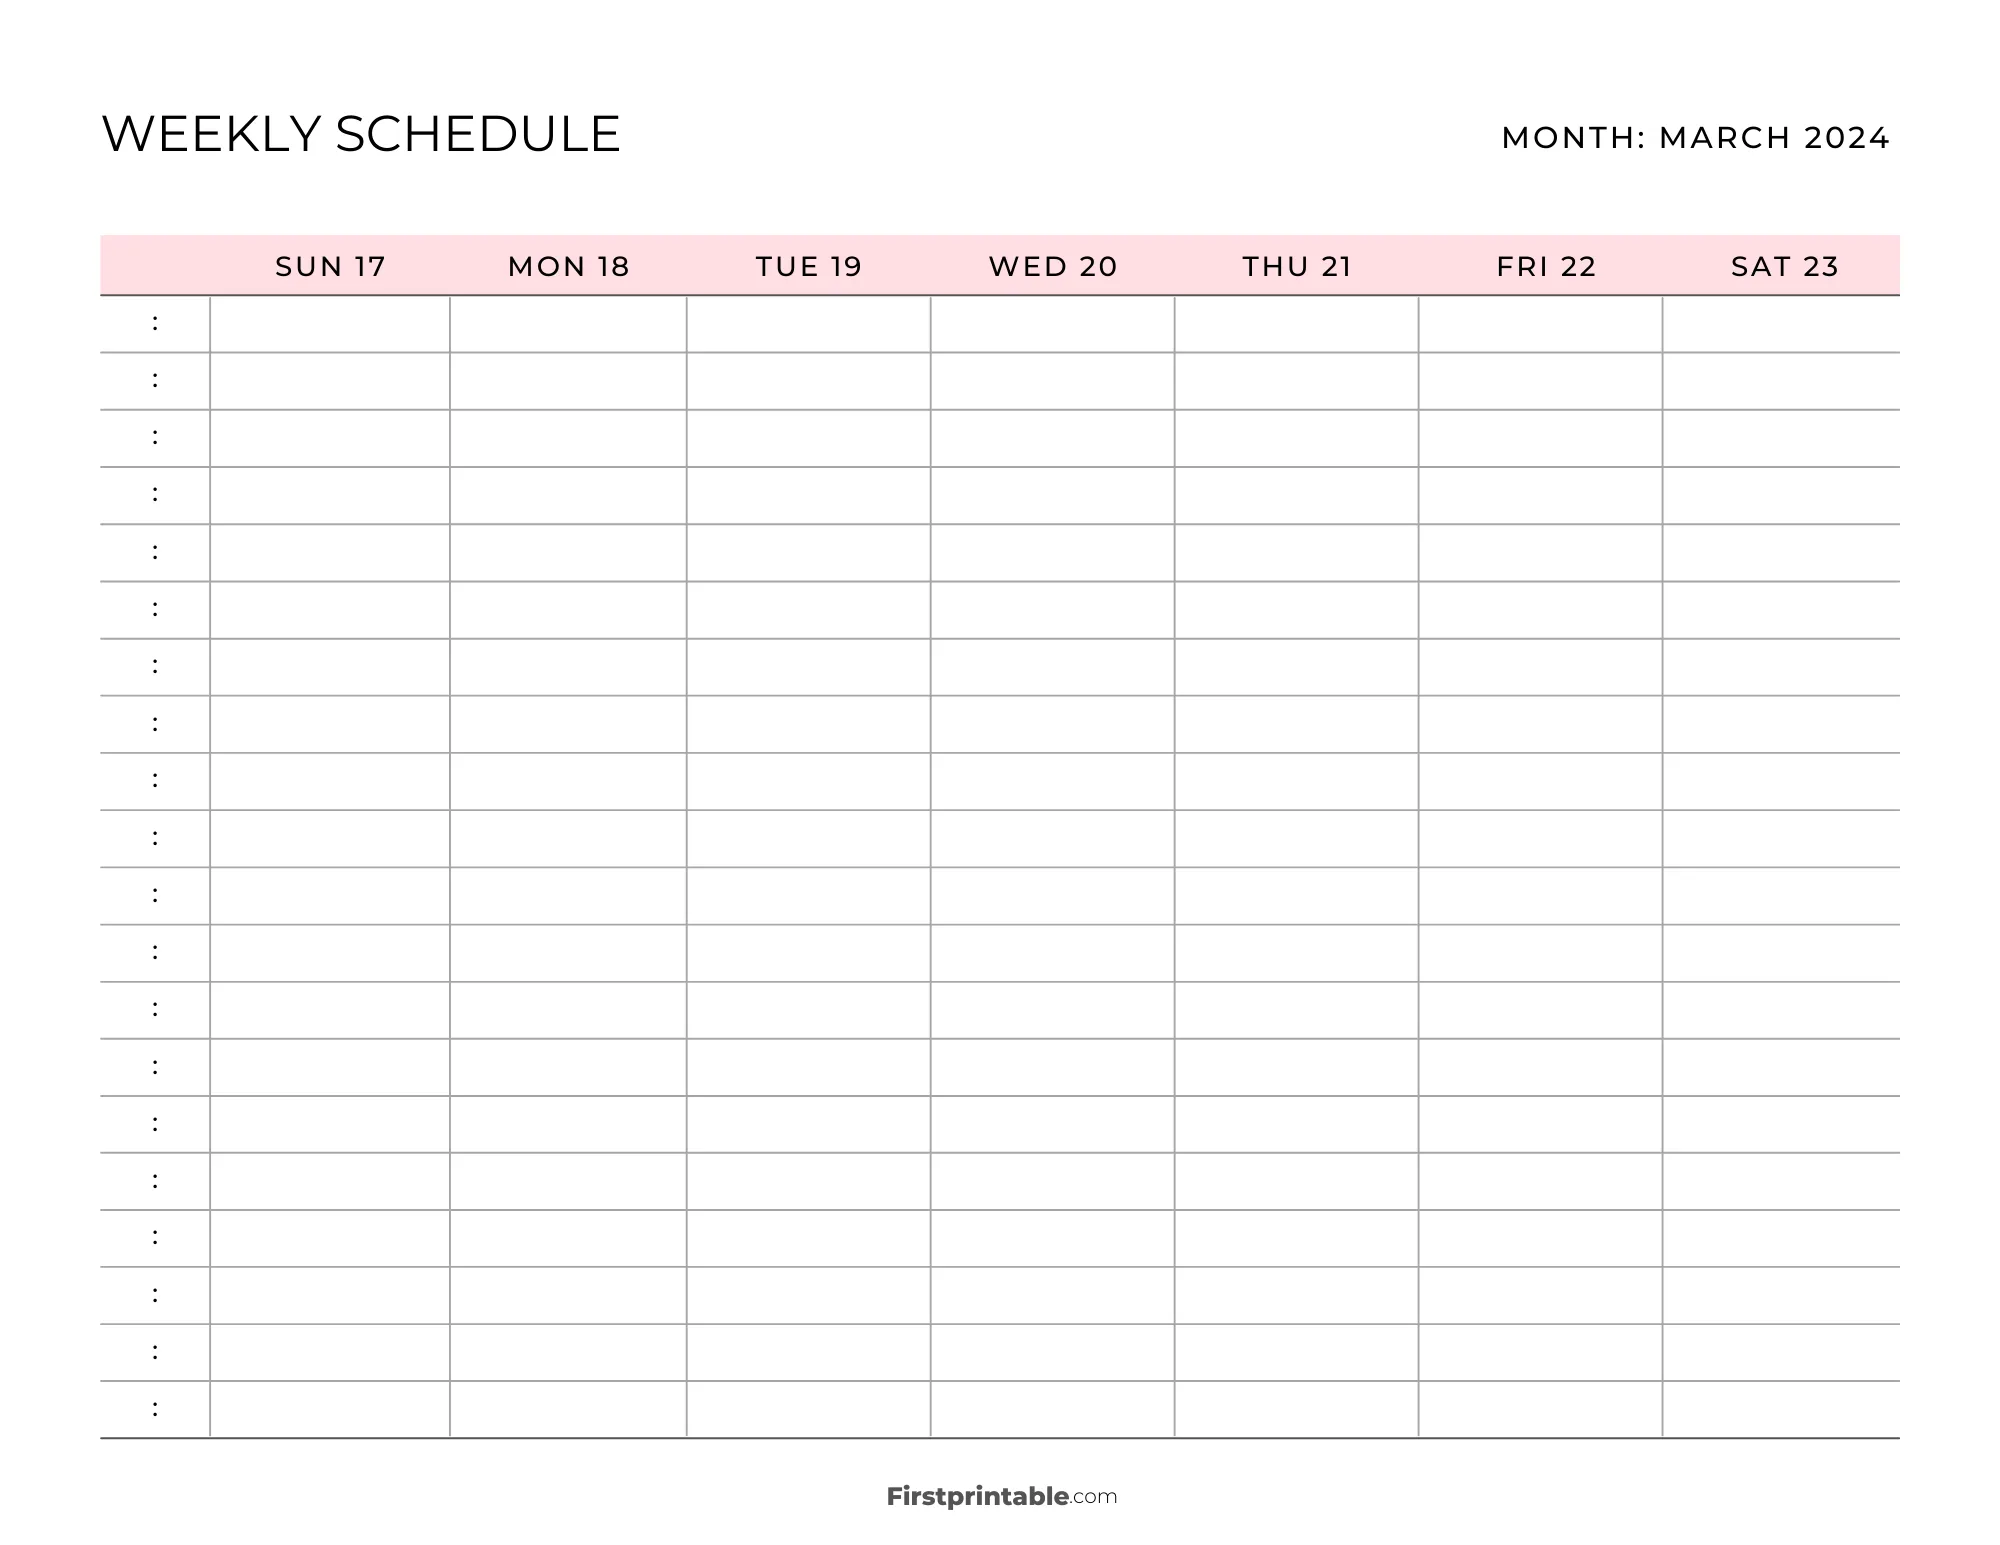 March 2024 Printable Weekly Schedule Template 03 - Pink